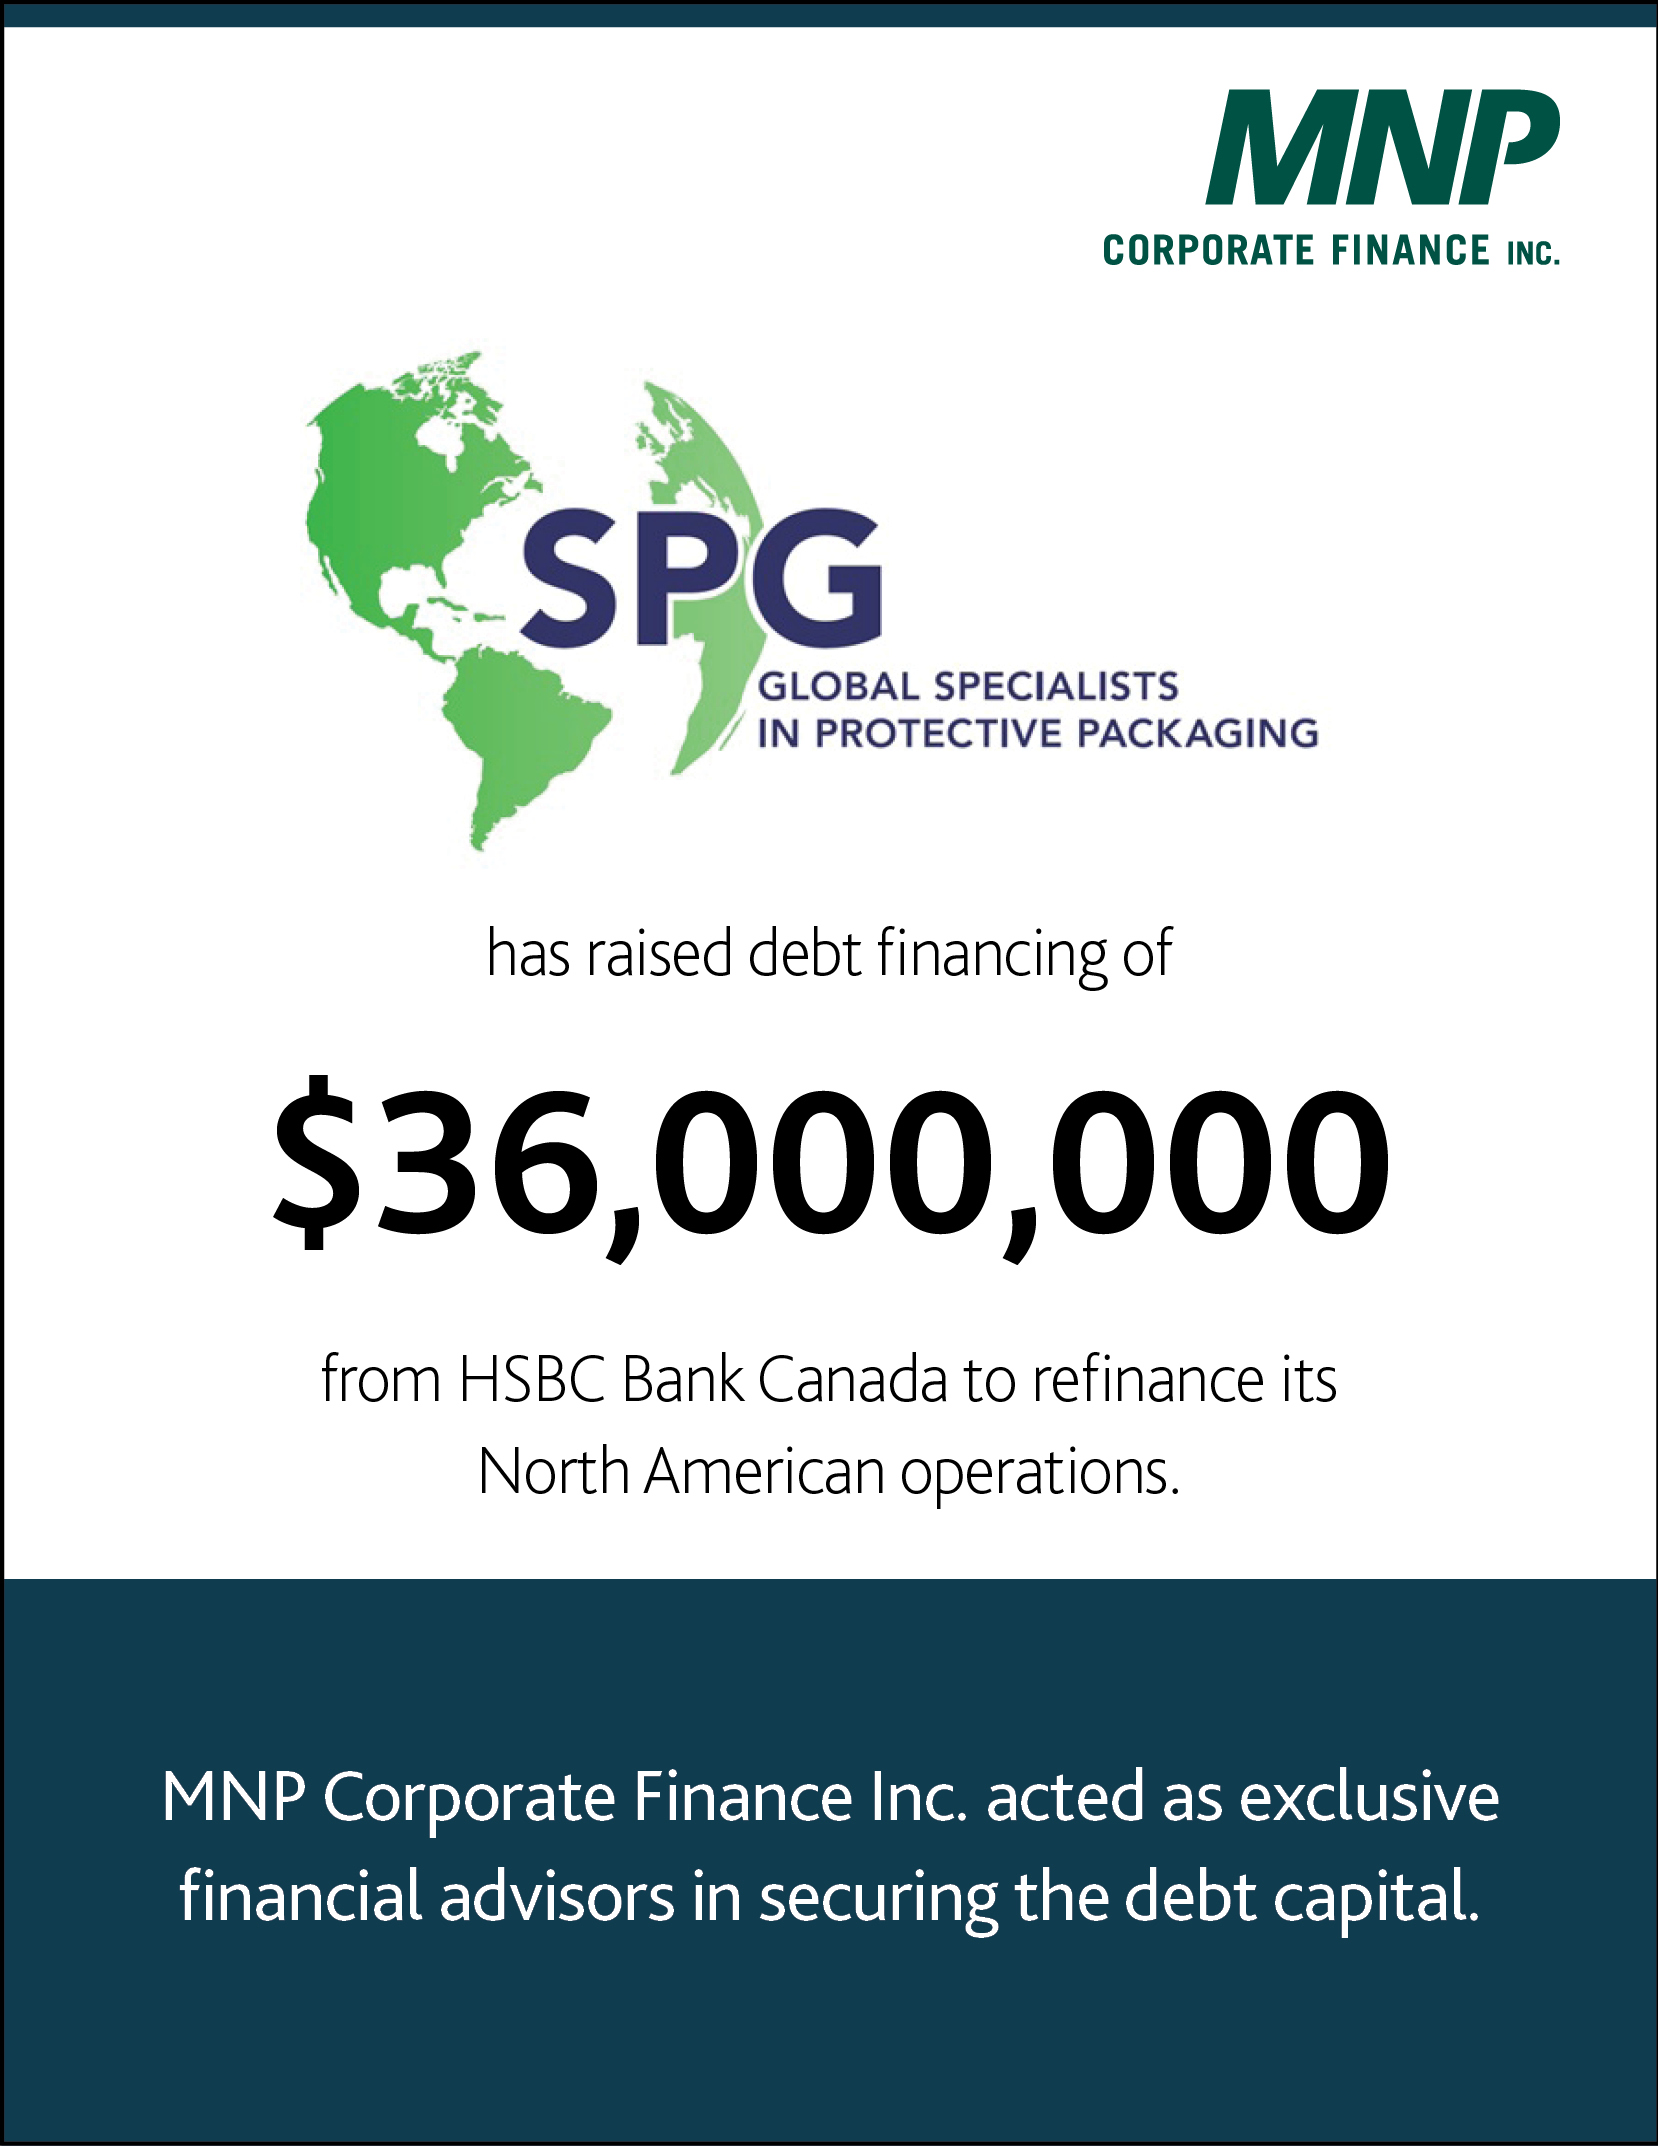 Specialized Packaging Group L.P. has raised debt financing of $36,000,000 from HSBC Bank Canada to refinance its North American operations.